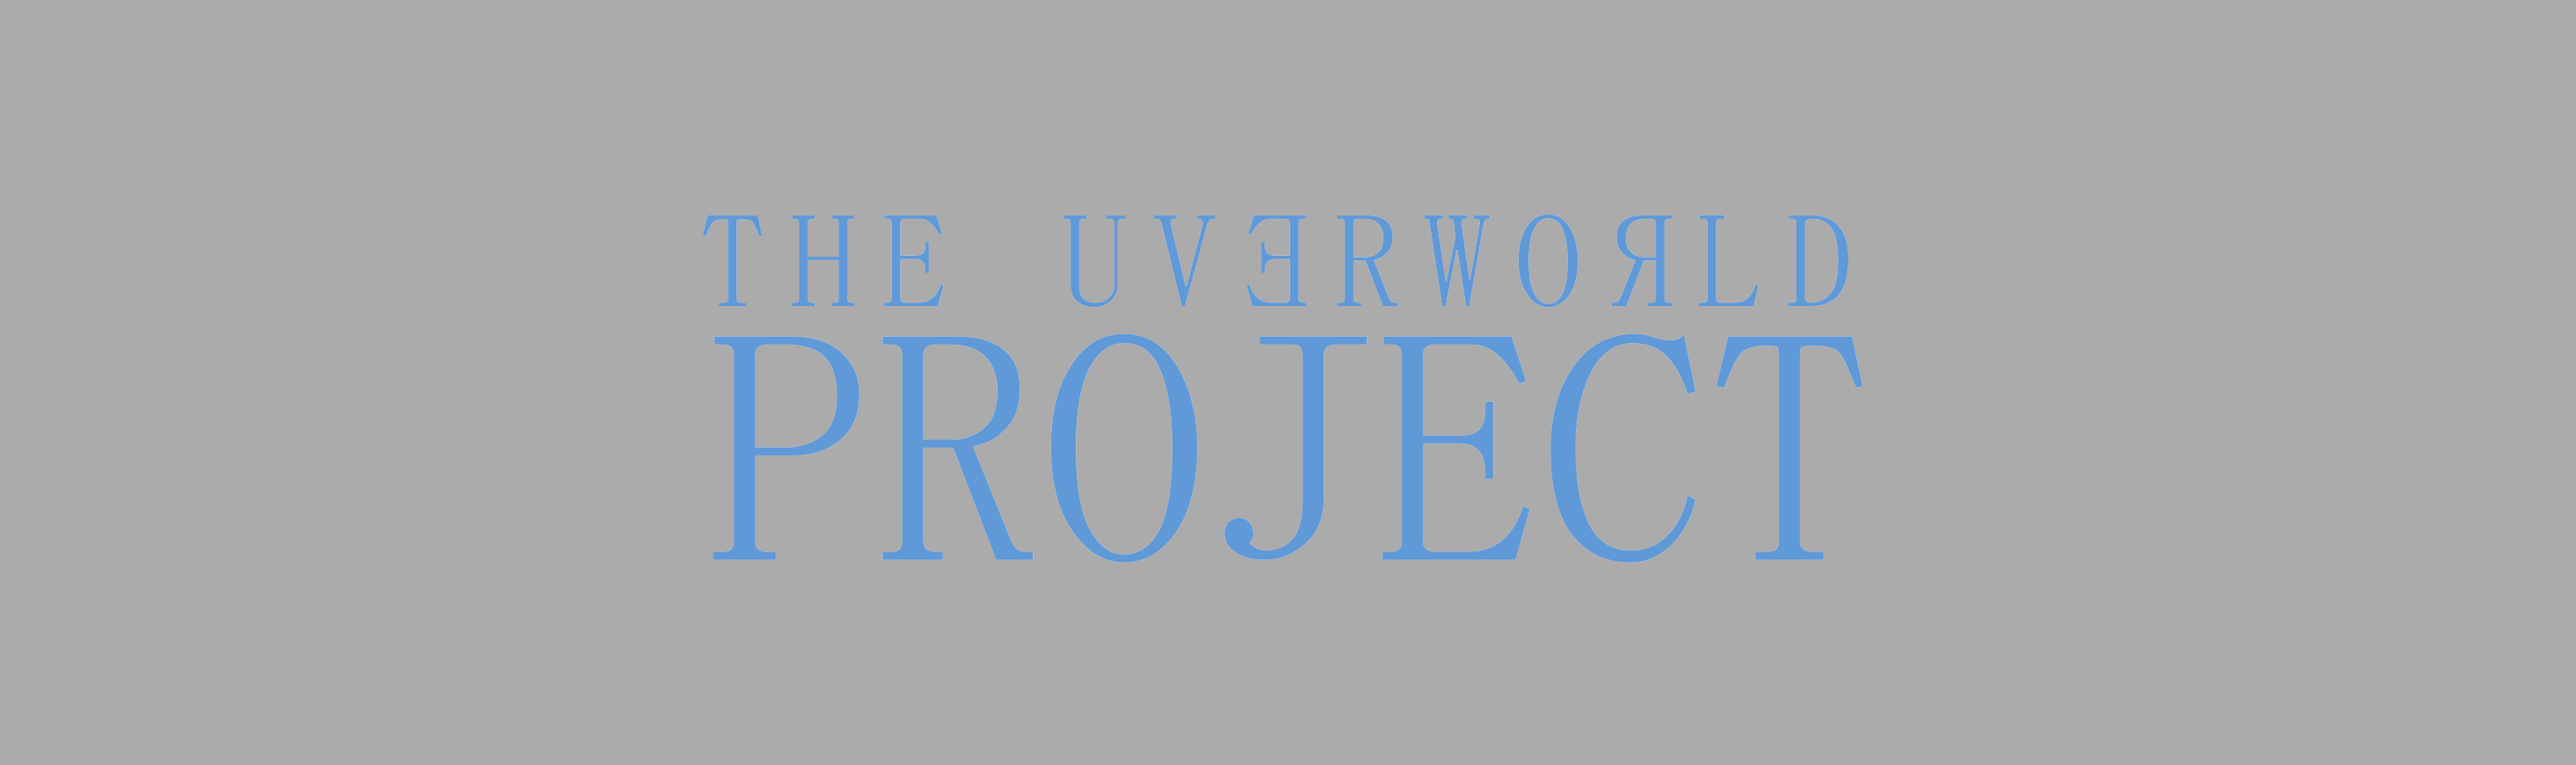 The Uverworld Project